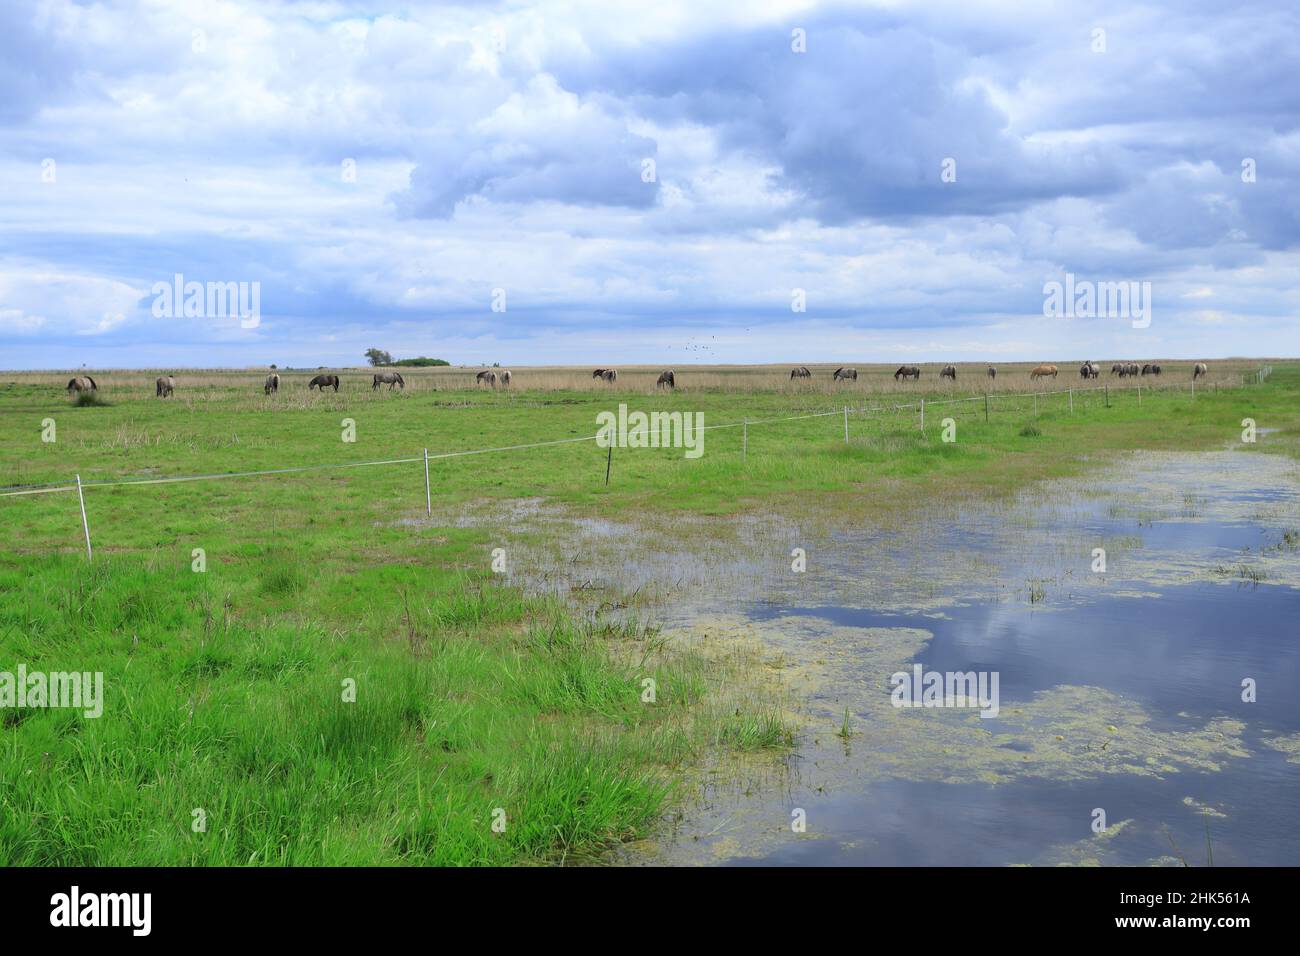 A herd of horses grazing in the Beka Nature Reserve Stock Photo